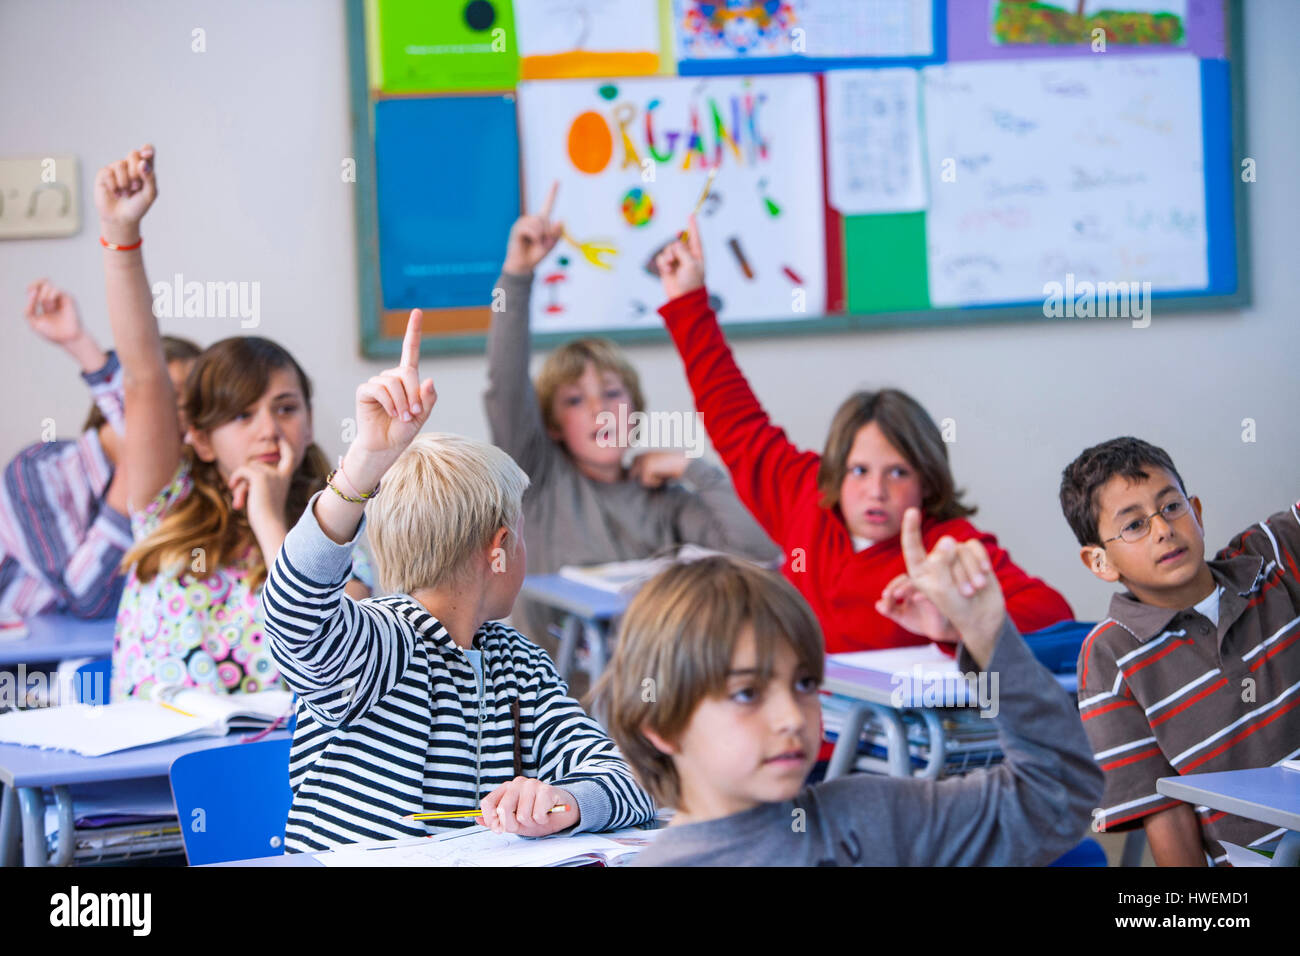 Students in classroom, sitting at desks, with arms raised Stock Photo